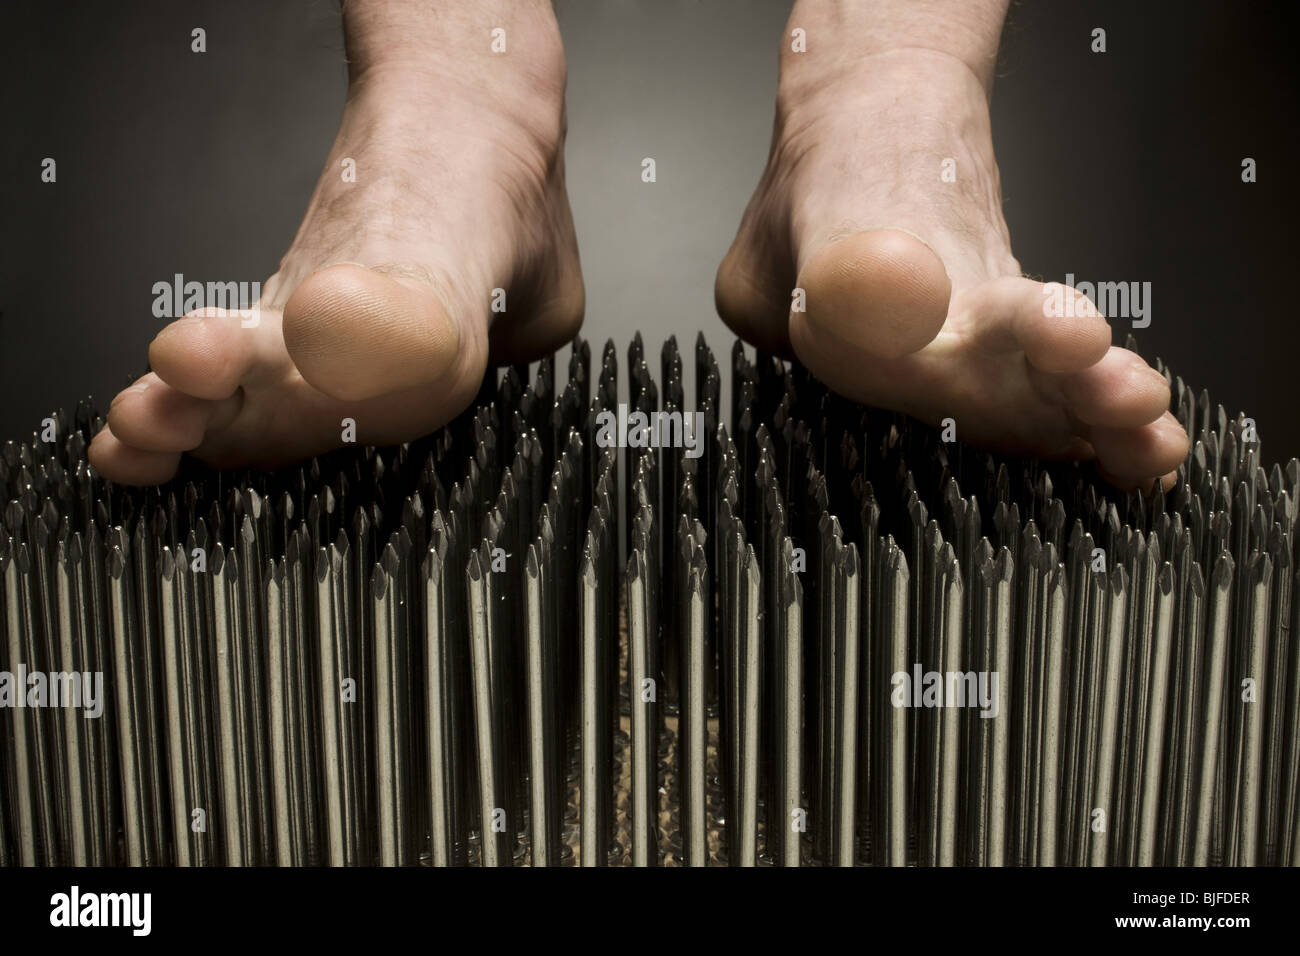 foot walking on nails Stock Photo - Alamy